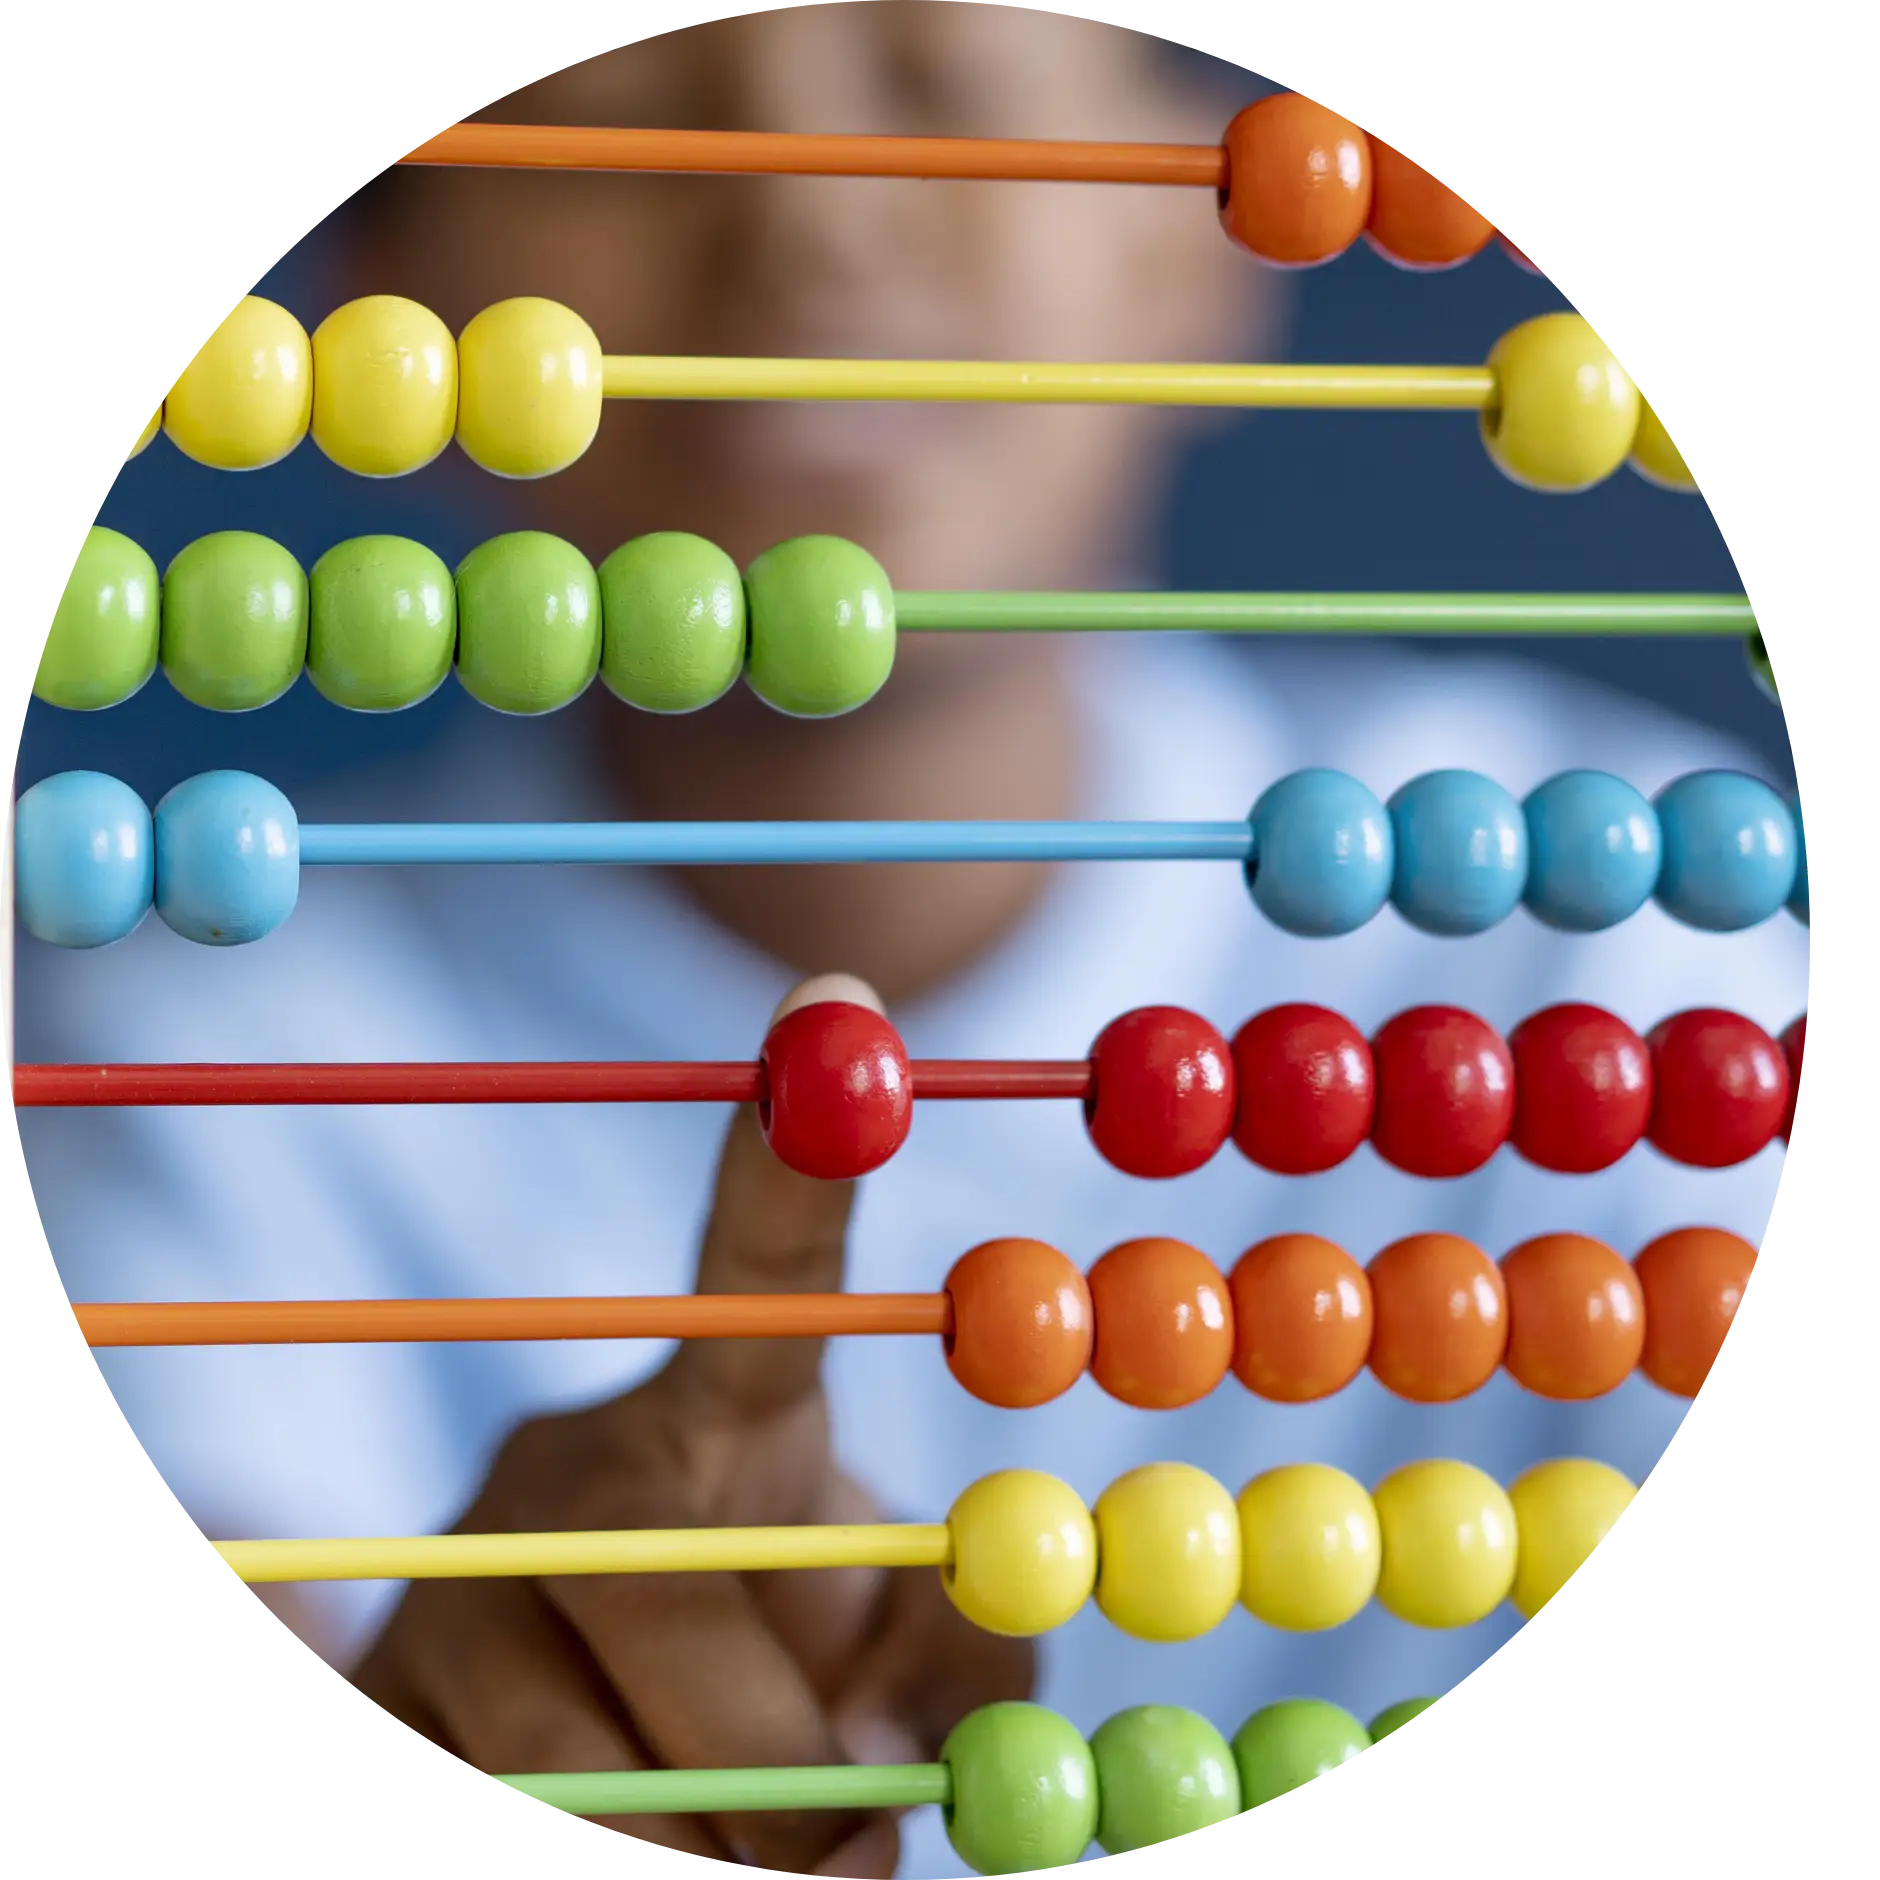 Abacus images